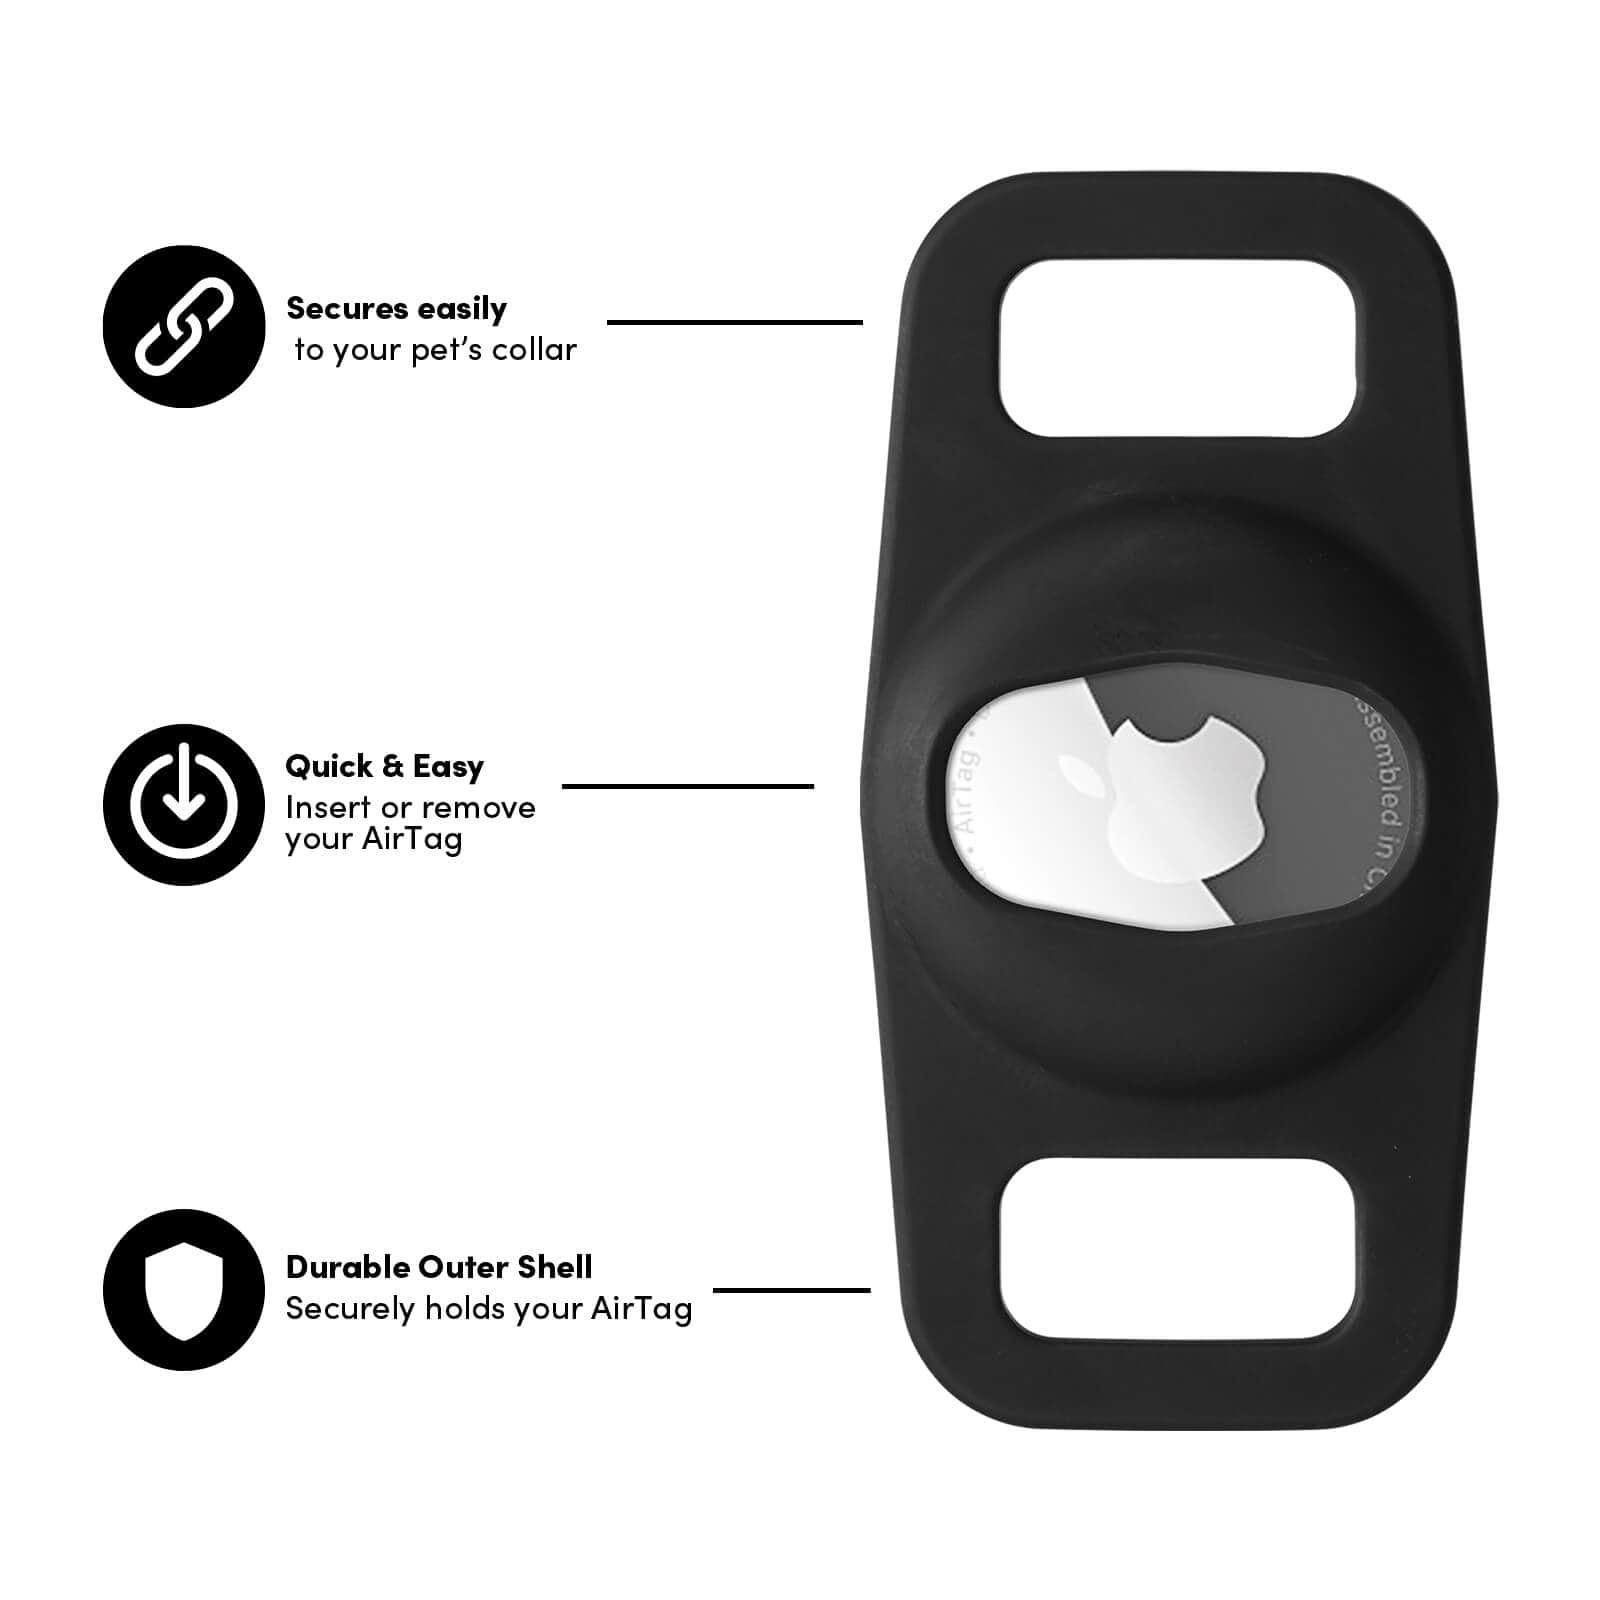 Durable outer shell securely holds your AirTag, secures easily to your pet's collar, quick and easy insert or remove your AirTag. color::Black